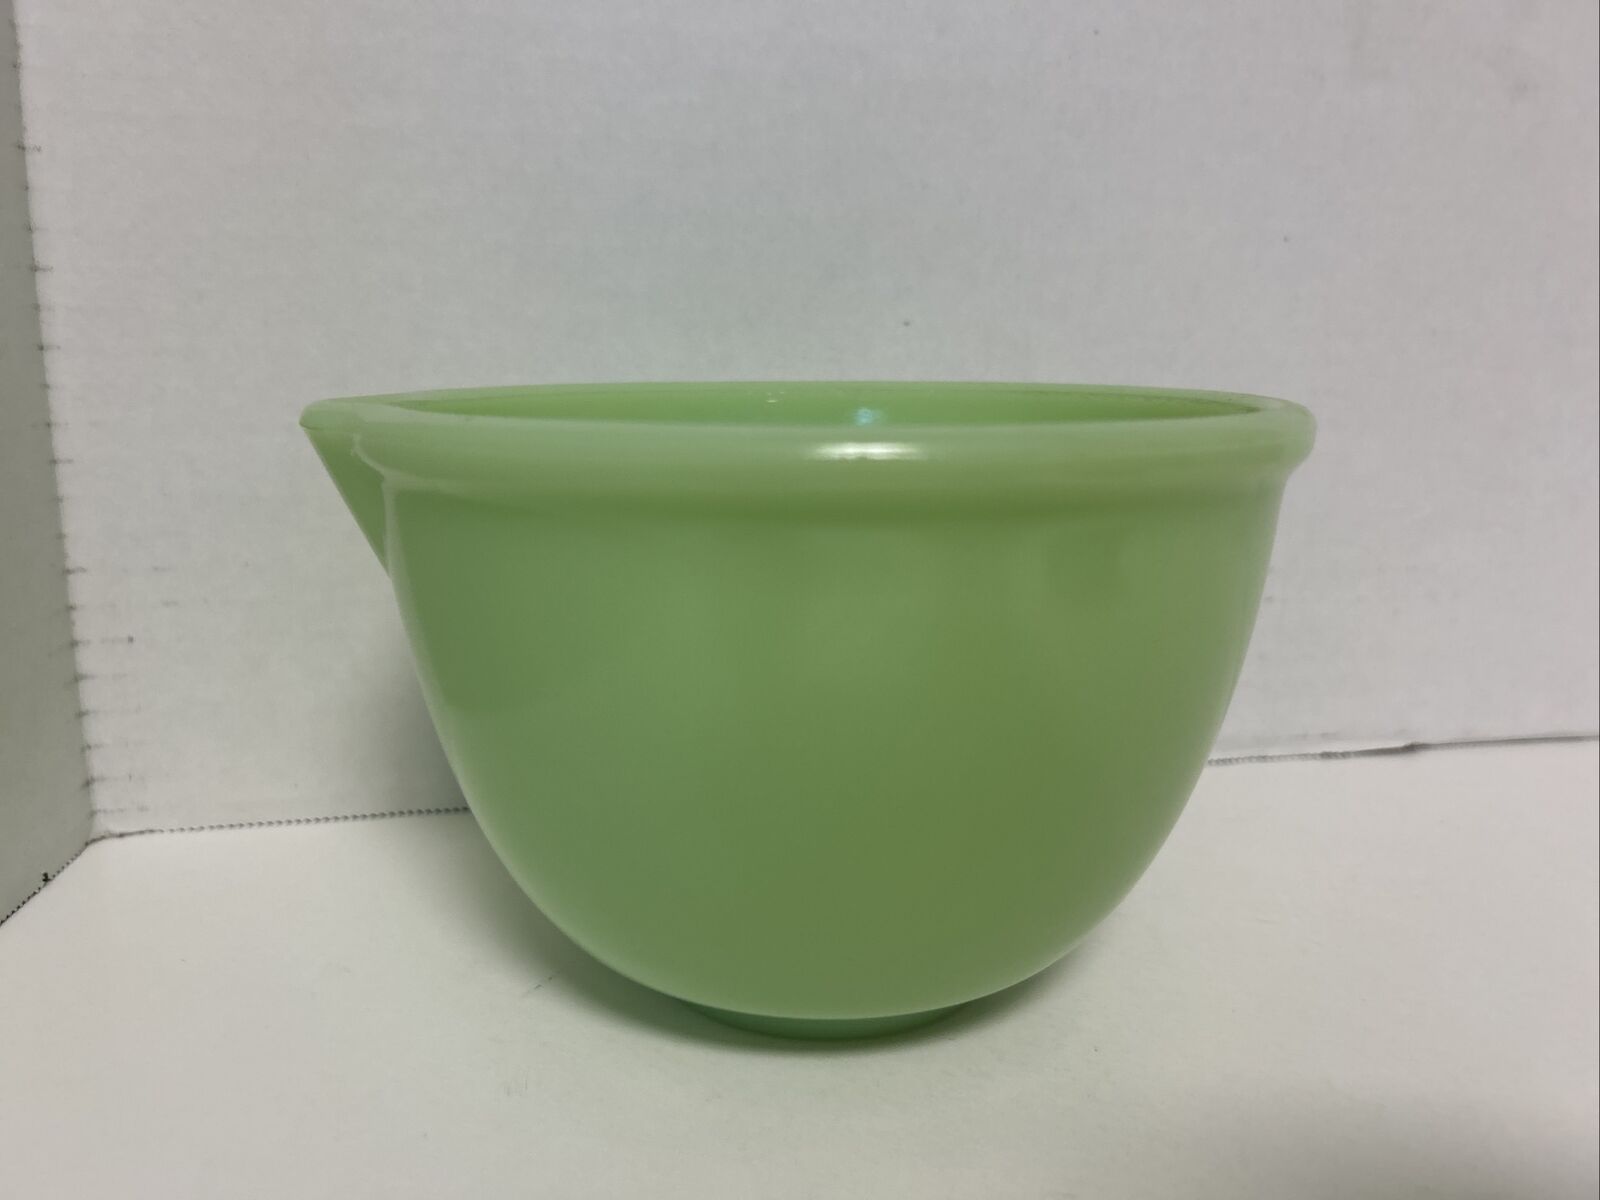 McKee 1940’s Jadeite Mixing Bowl with Spout 6.5 inches. Excellent Condition